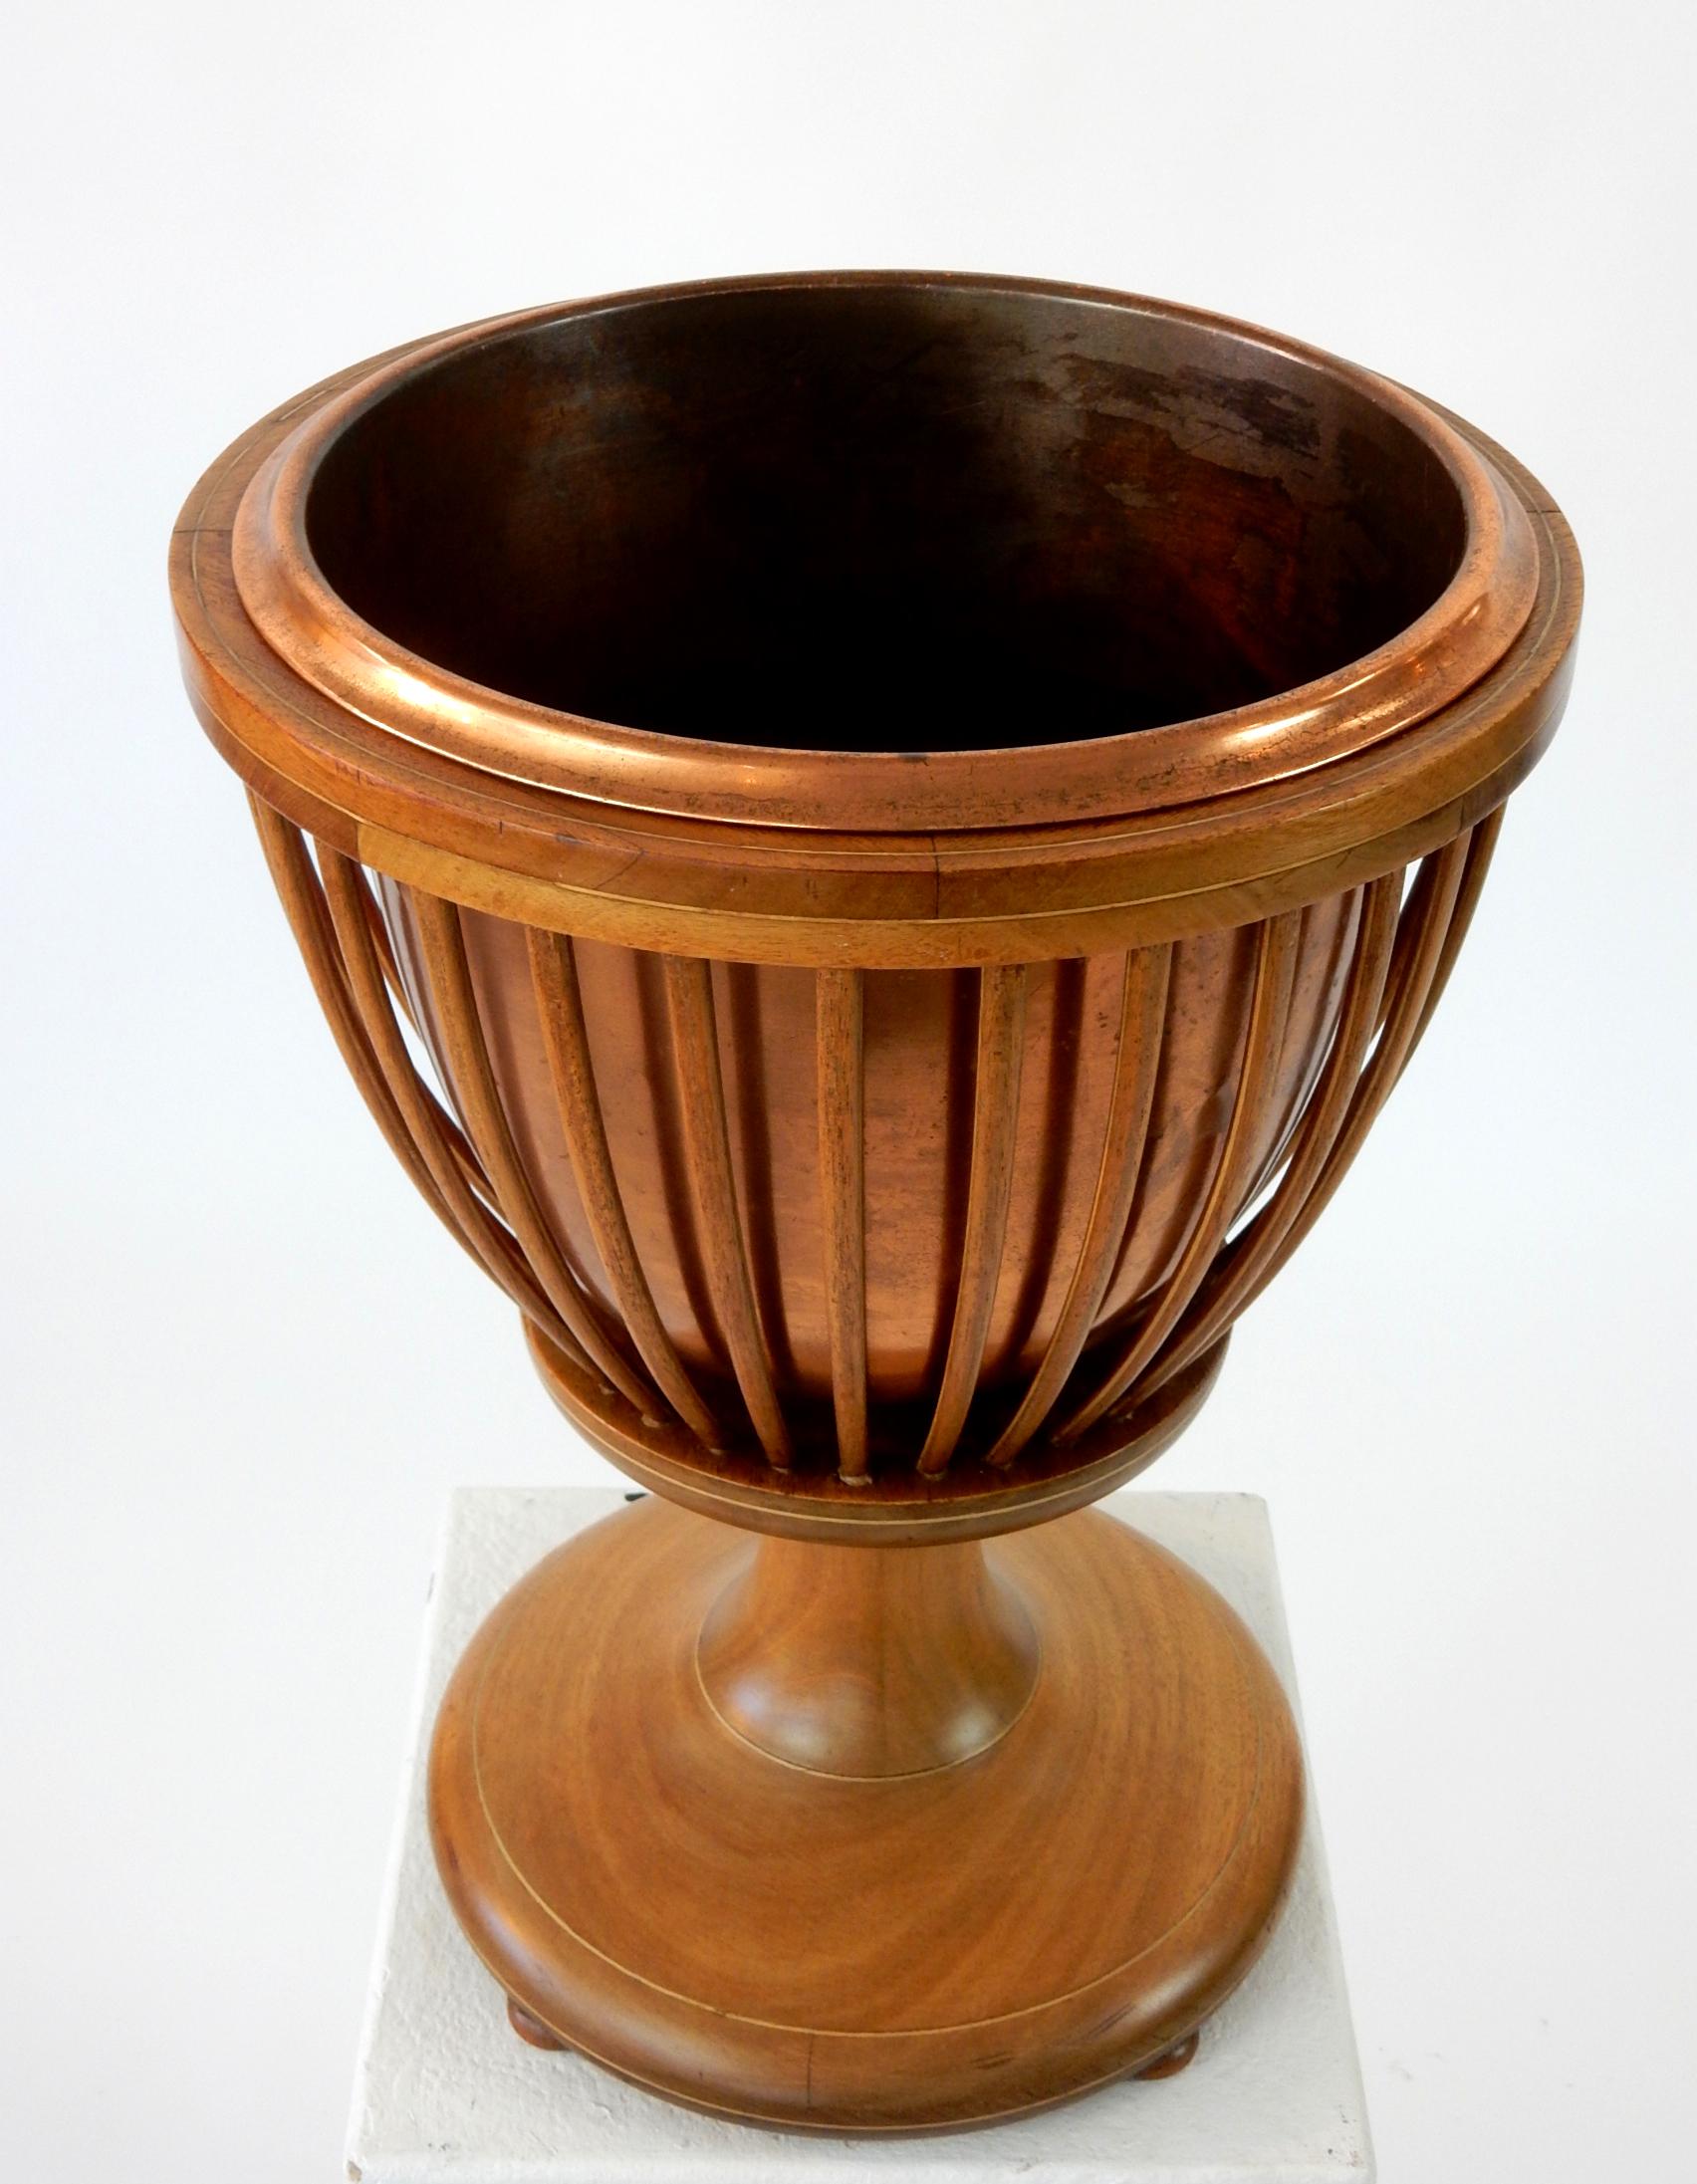 19th century slatted inlaid mahogany planter with copper liner.
Beautifully hand crafted piece. Unsigned but stamped 1795 on base.
Stands 19 inch tall x 14 inch wide.